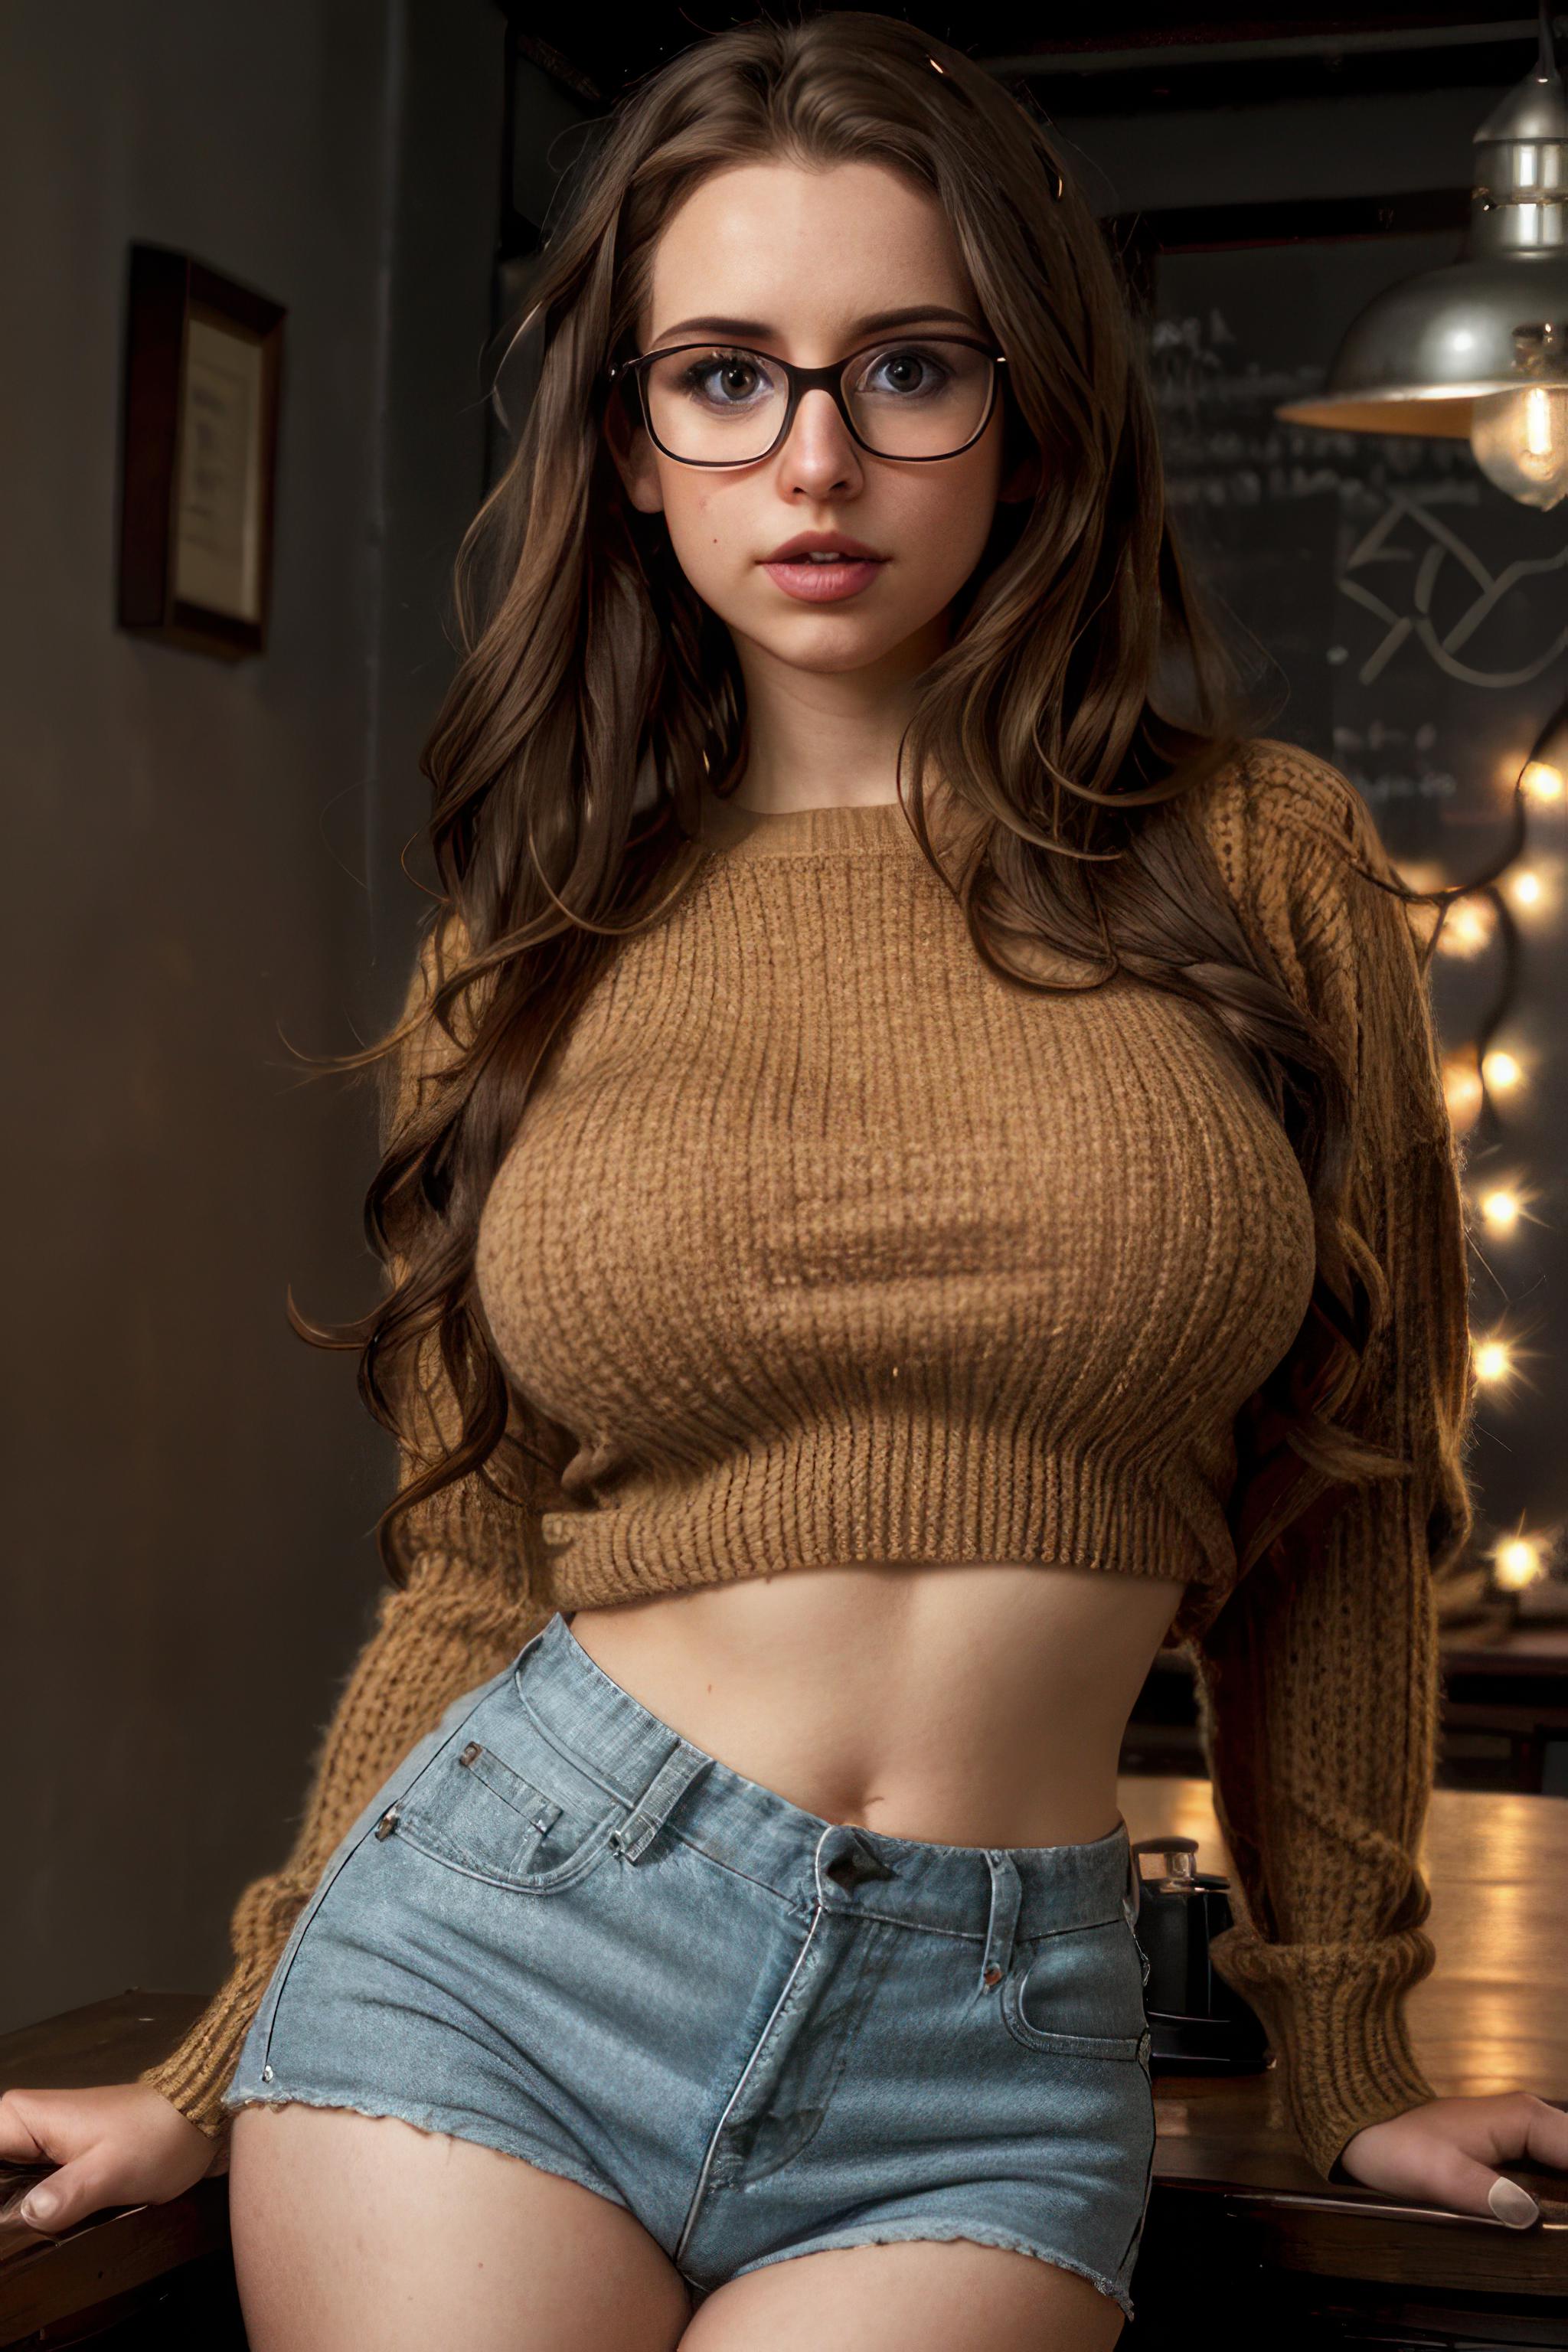 A young woman in glasses wearing a brown sweater and blue jeans.